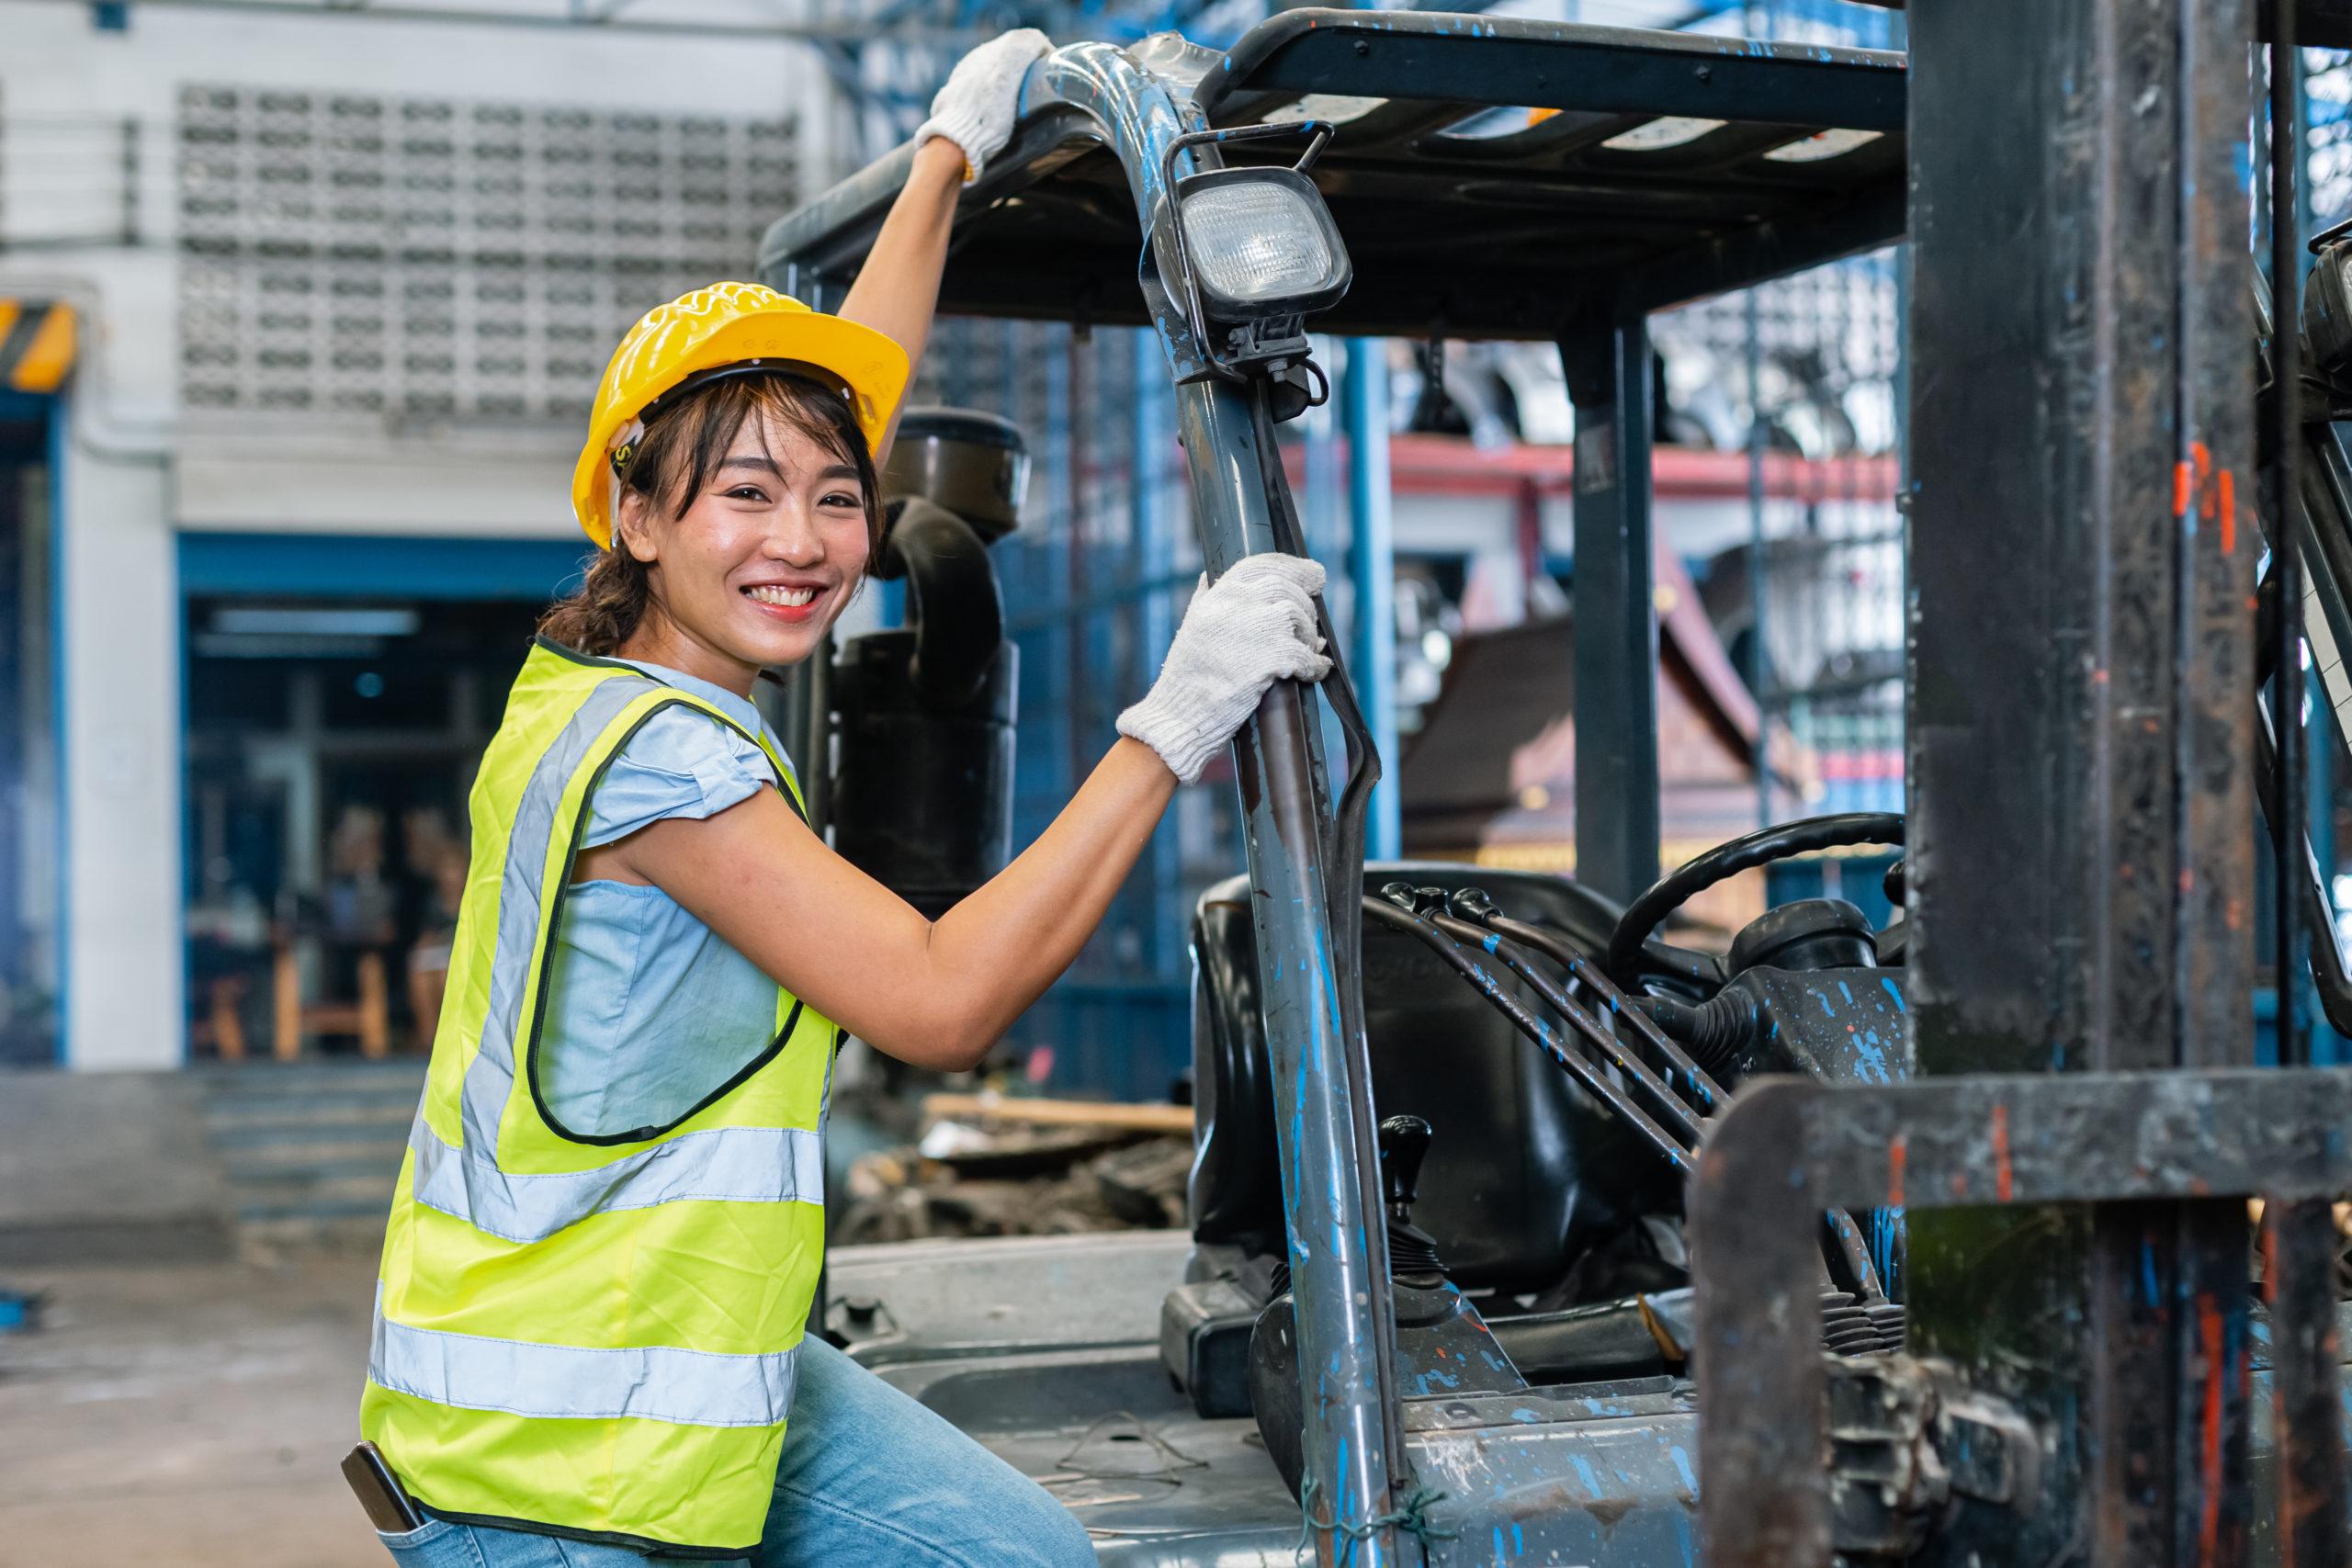 Female forklift operator pausing her work to pose for a photo next to the forklift.